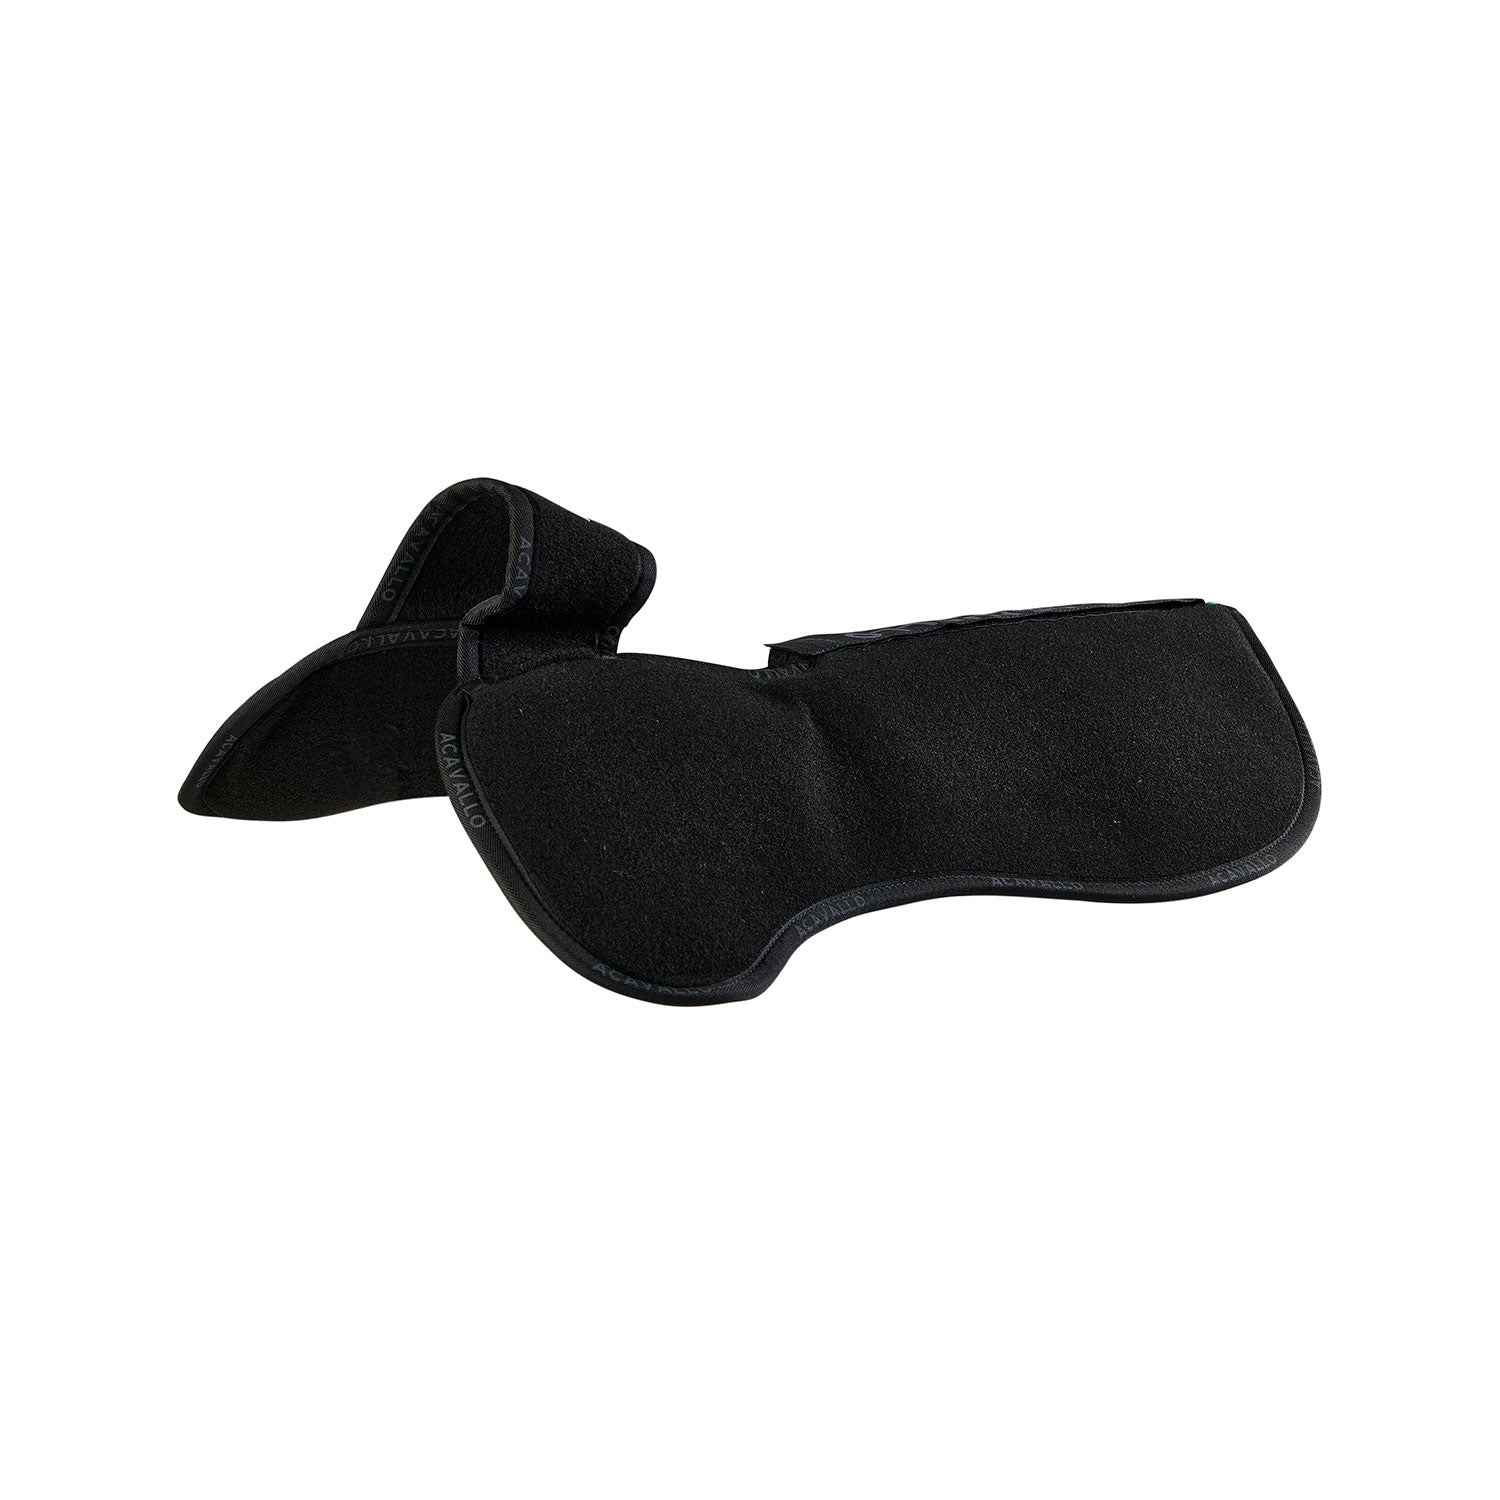 Pad WITHERS FREE FRONT RISER CONFIGURATION WITH DOUBLE FELT - Reitstiefel Kandel - Dein Reitshop